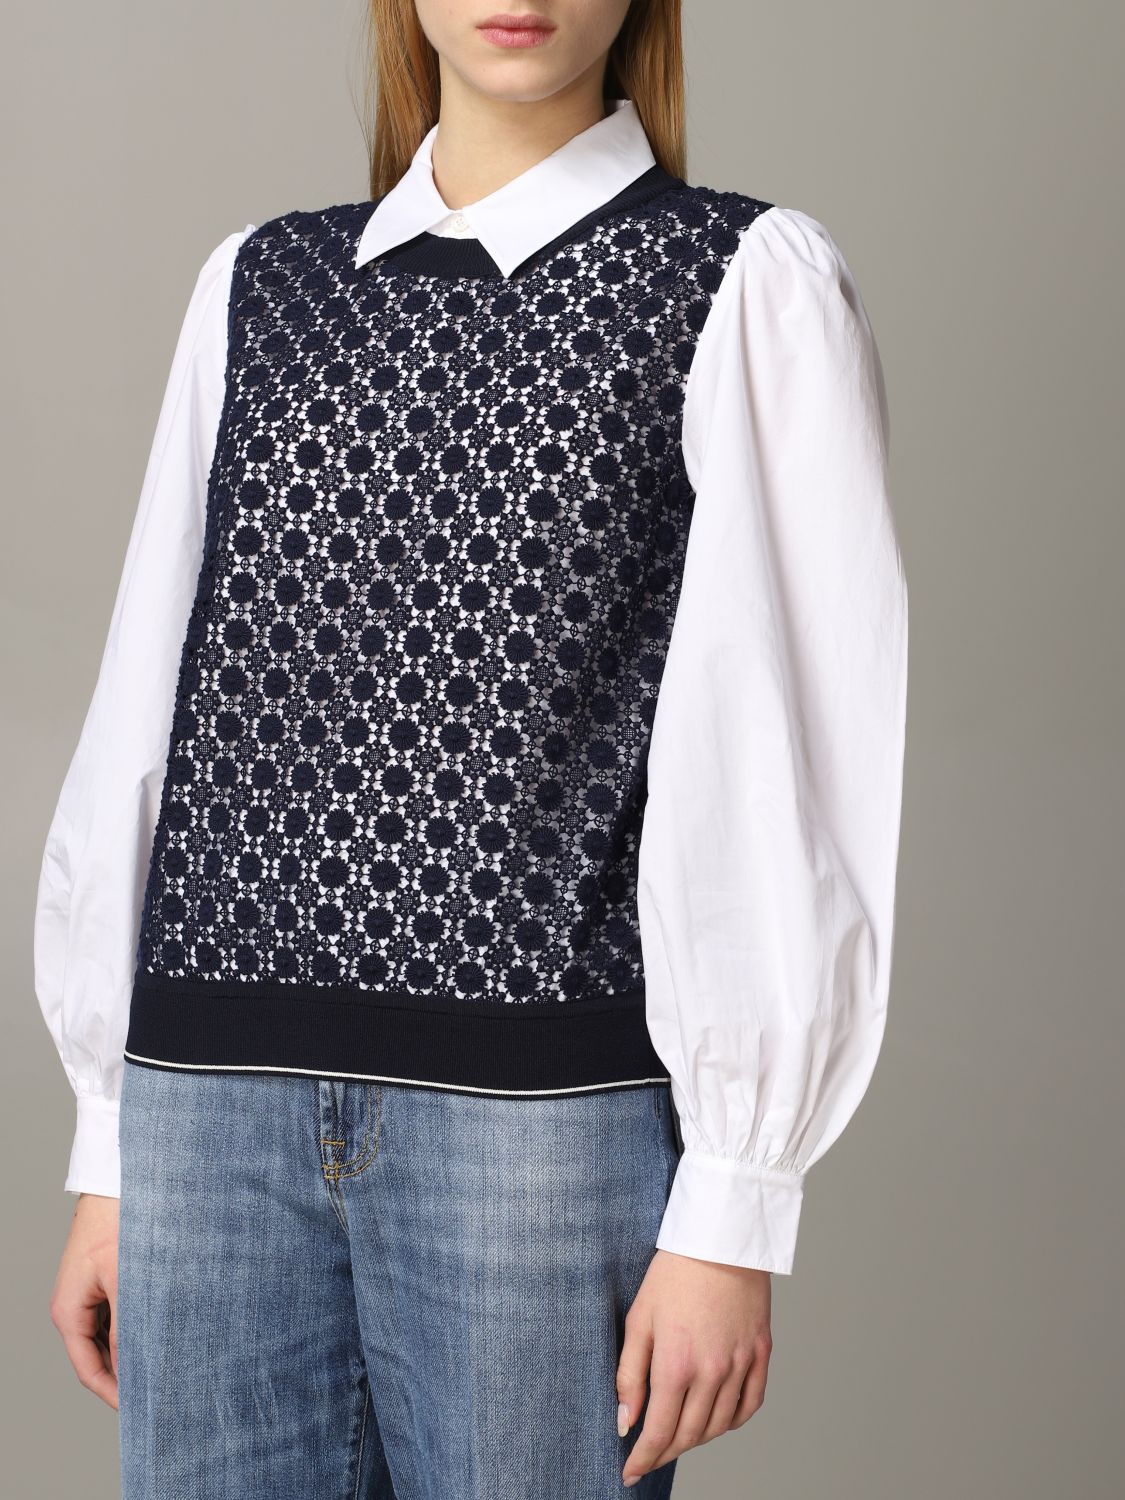 Tory Burch Outlet: sweater for woman - Blue | Tory Burch sweater 63197  online on 